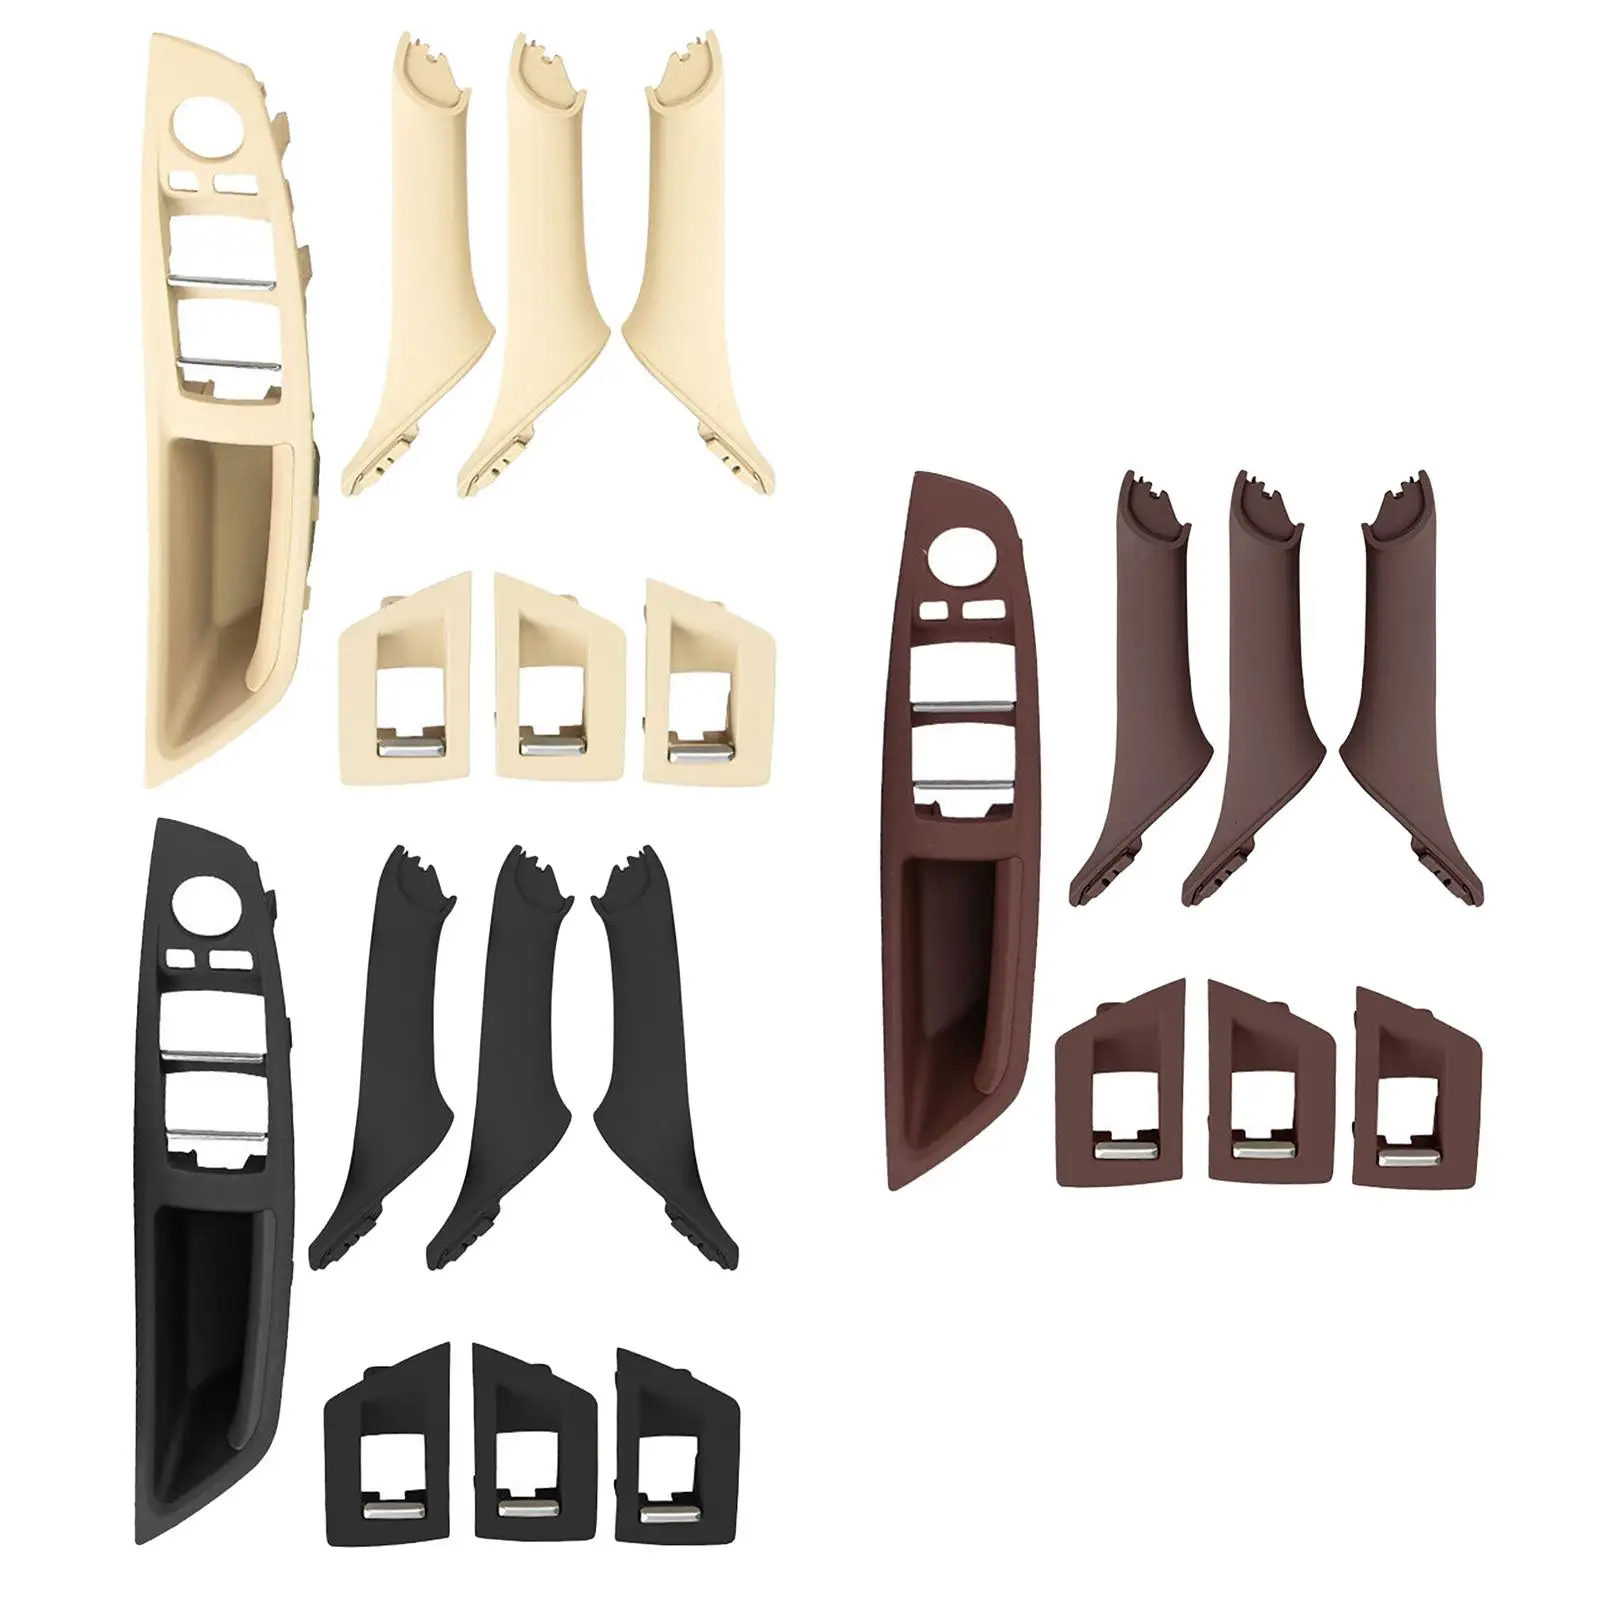 7 Pieces Vehicle Car Interior Door Handle Plate Cover for BMW 5 Series F10 F18, Professional